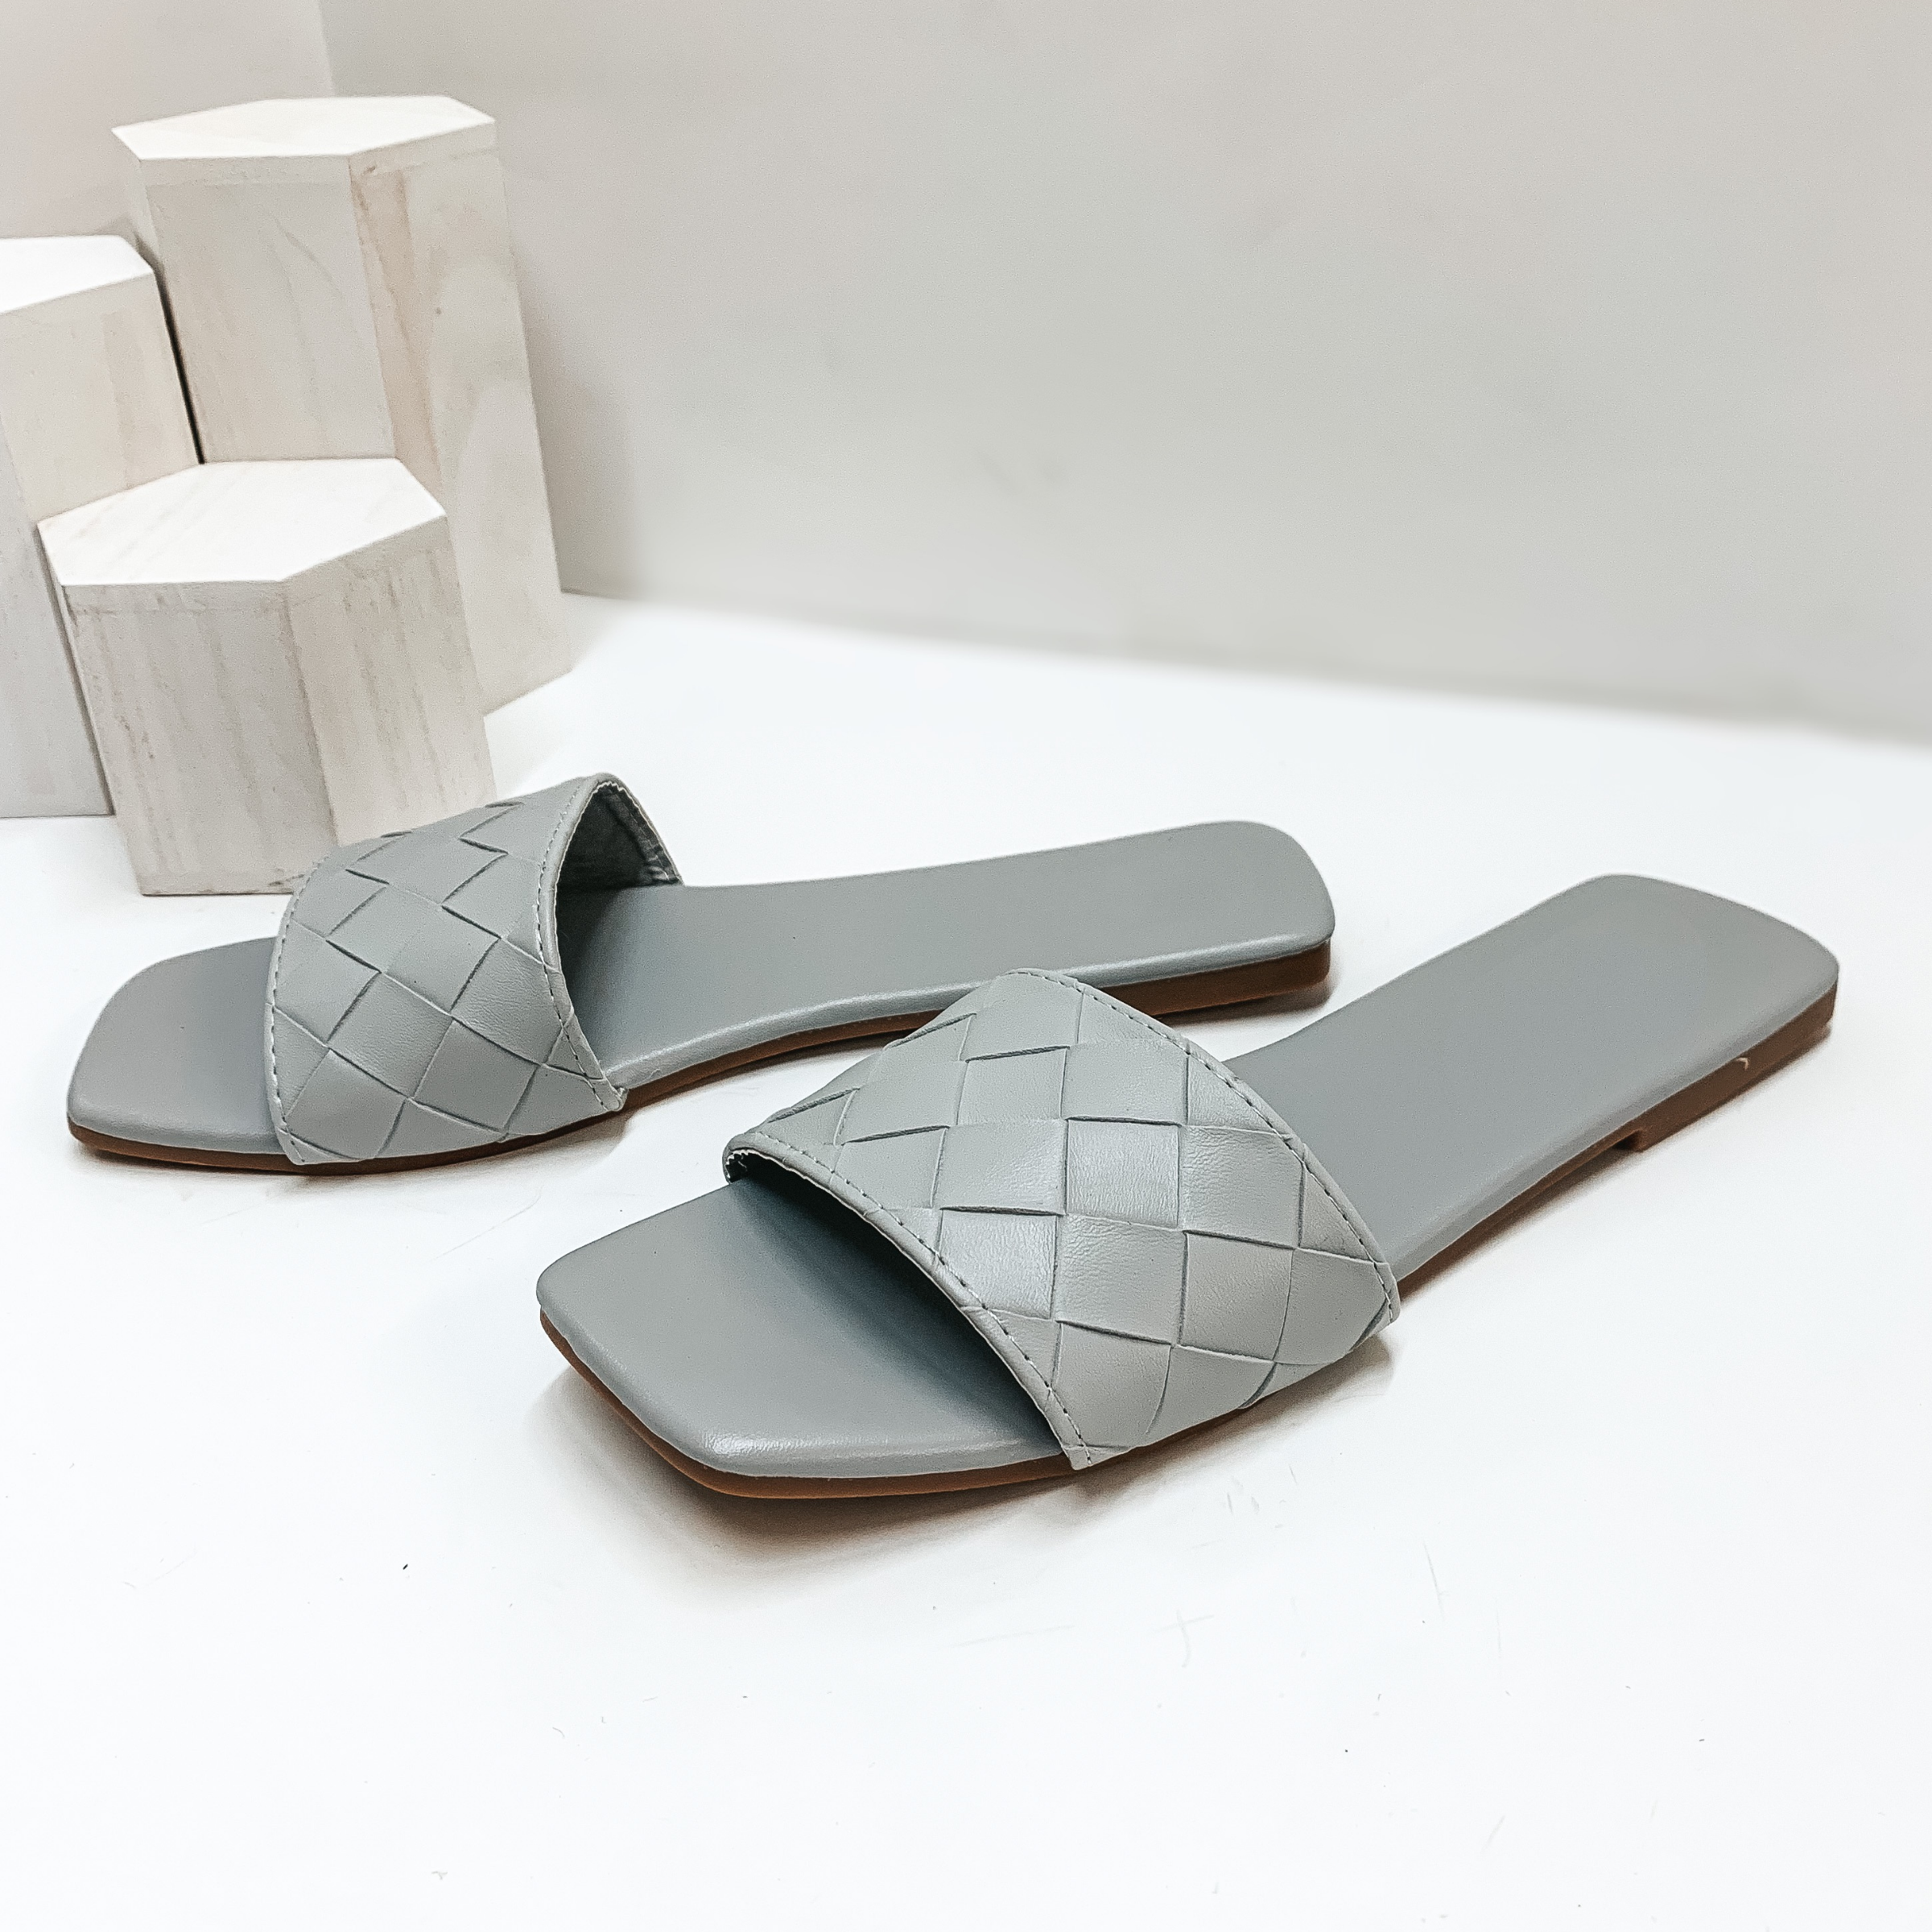 Always Looking Up Basket Weave One Strap Slide On Sandals in Grey - Giddy Up Glamour Boutique